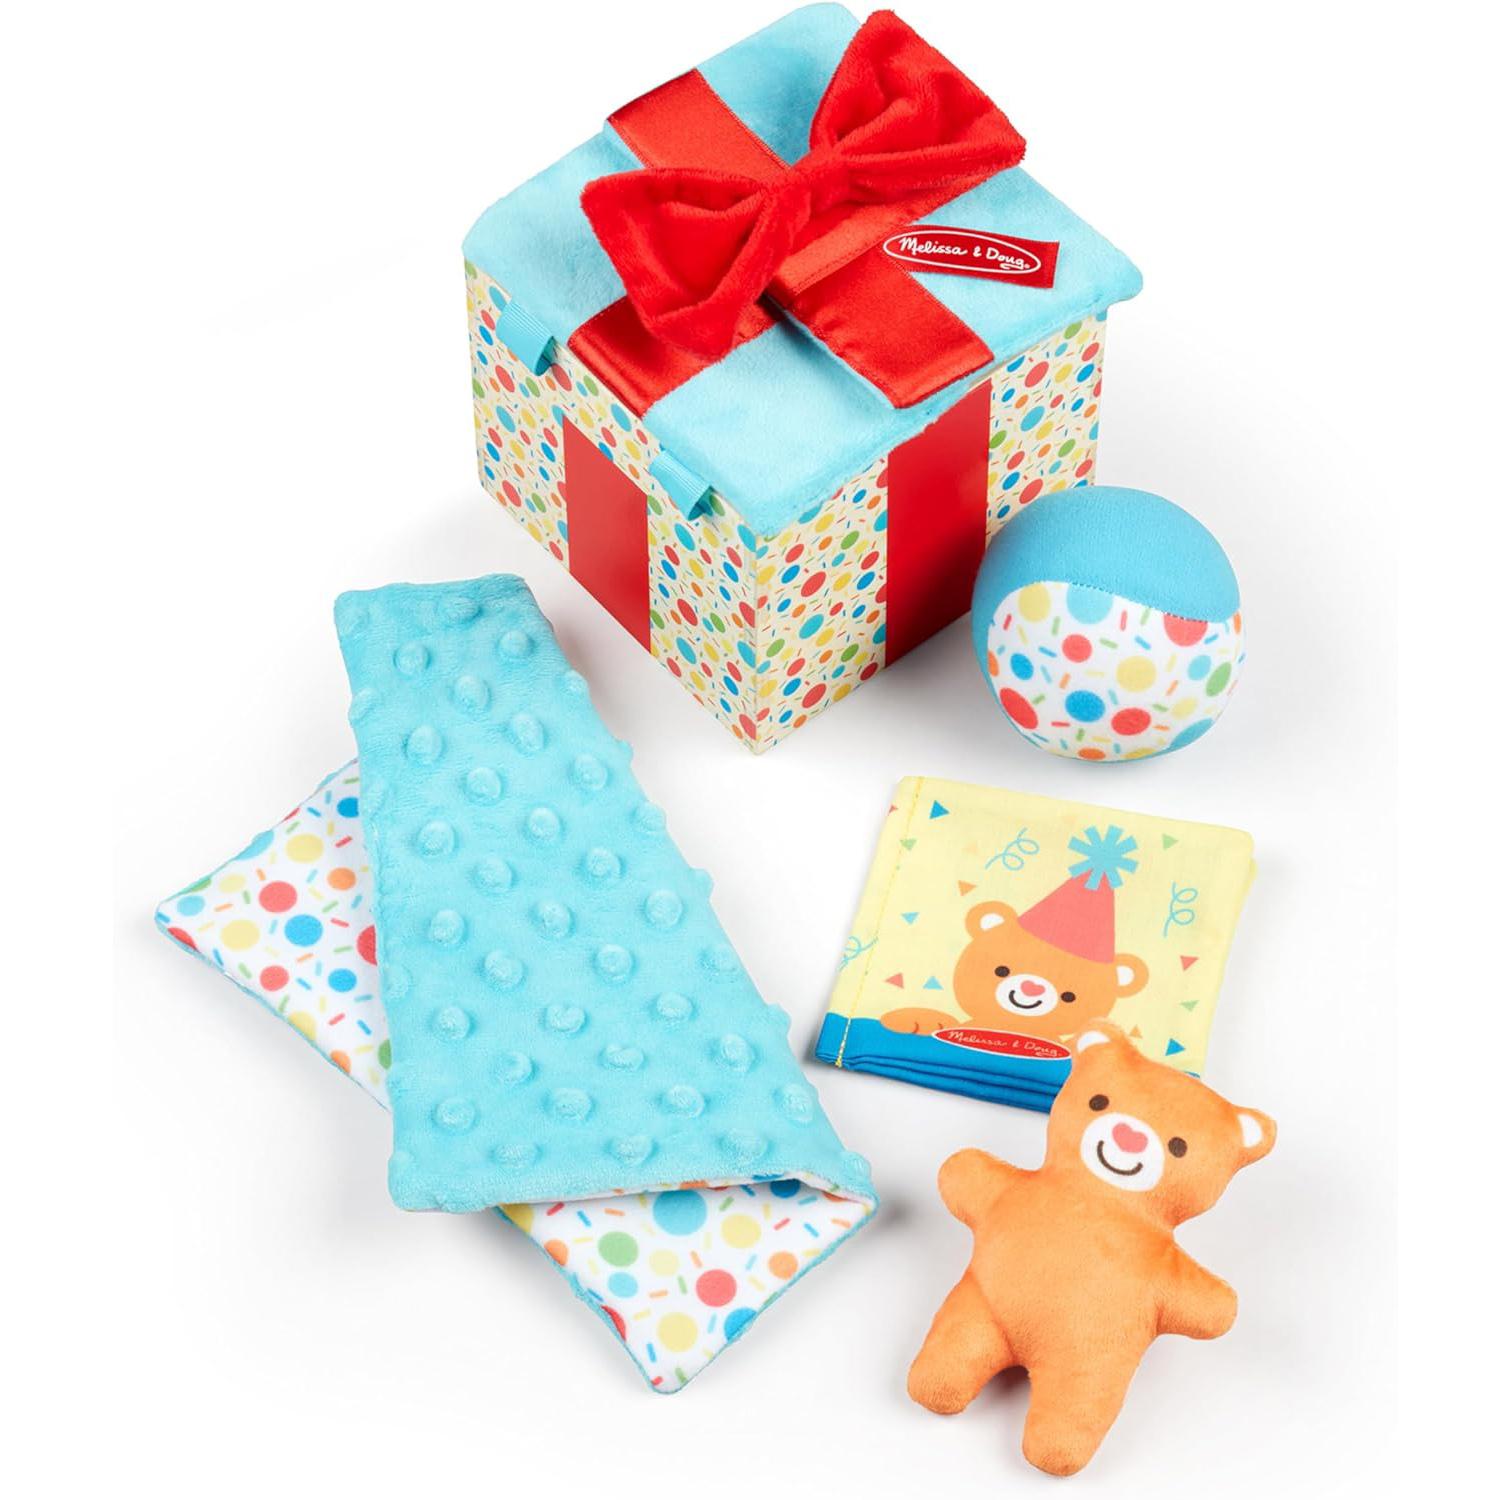 Melissa and Doug Wooden Surprise Gift Box Infant Toy for $8.24